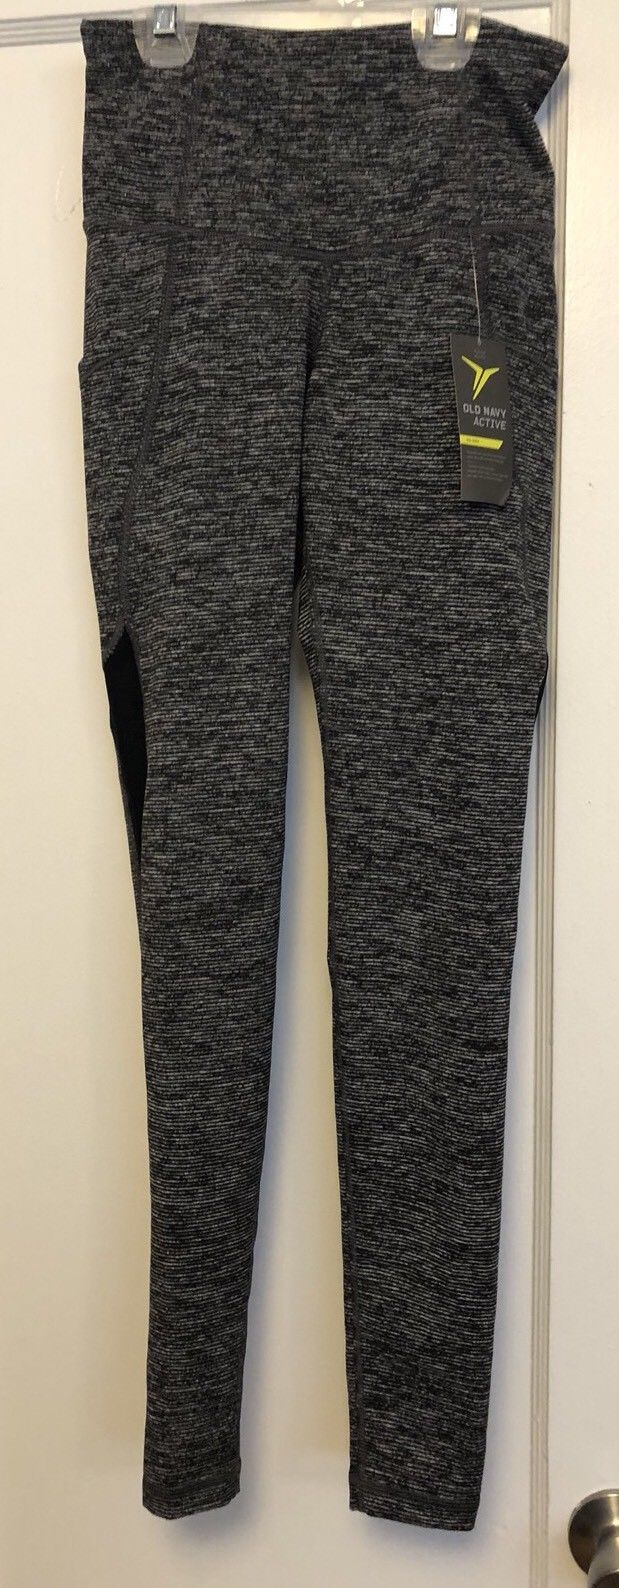 BNWT Old Navy Active Women's Go DRY and 50 similar items